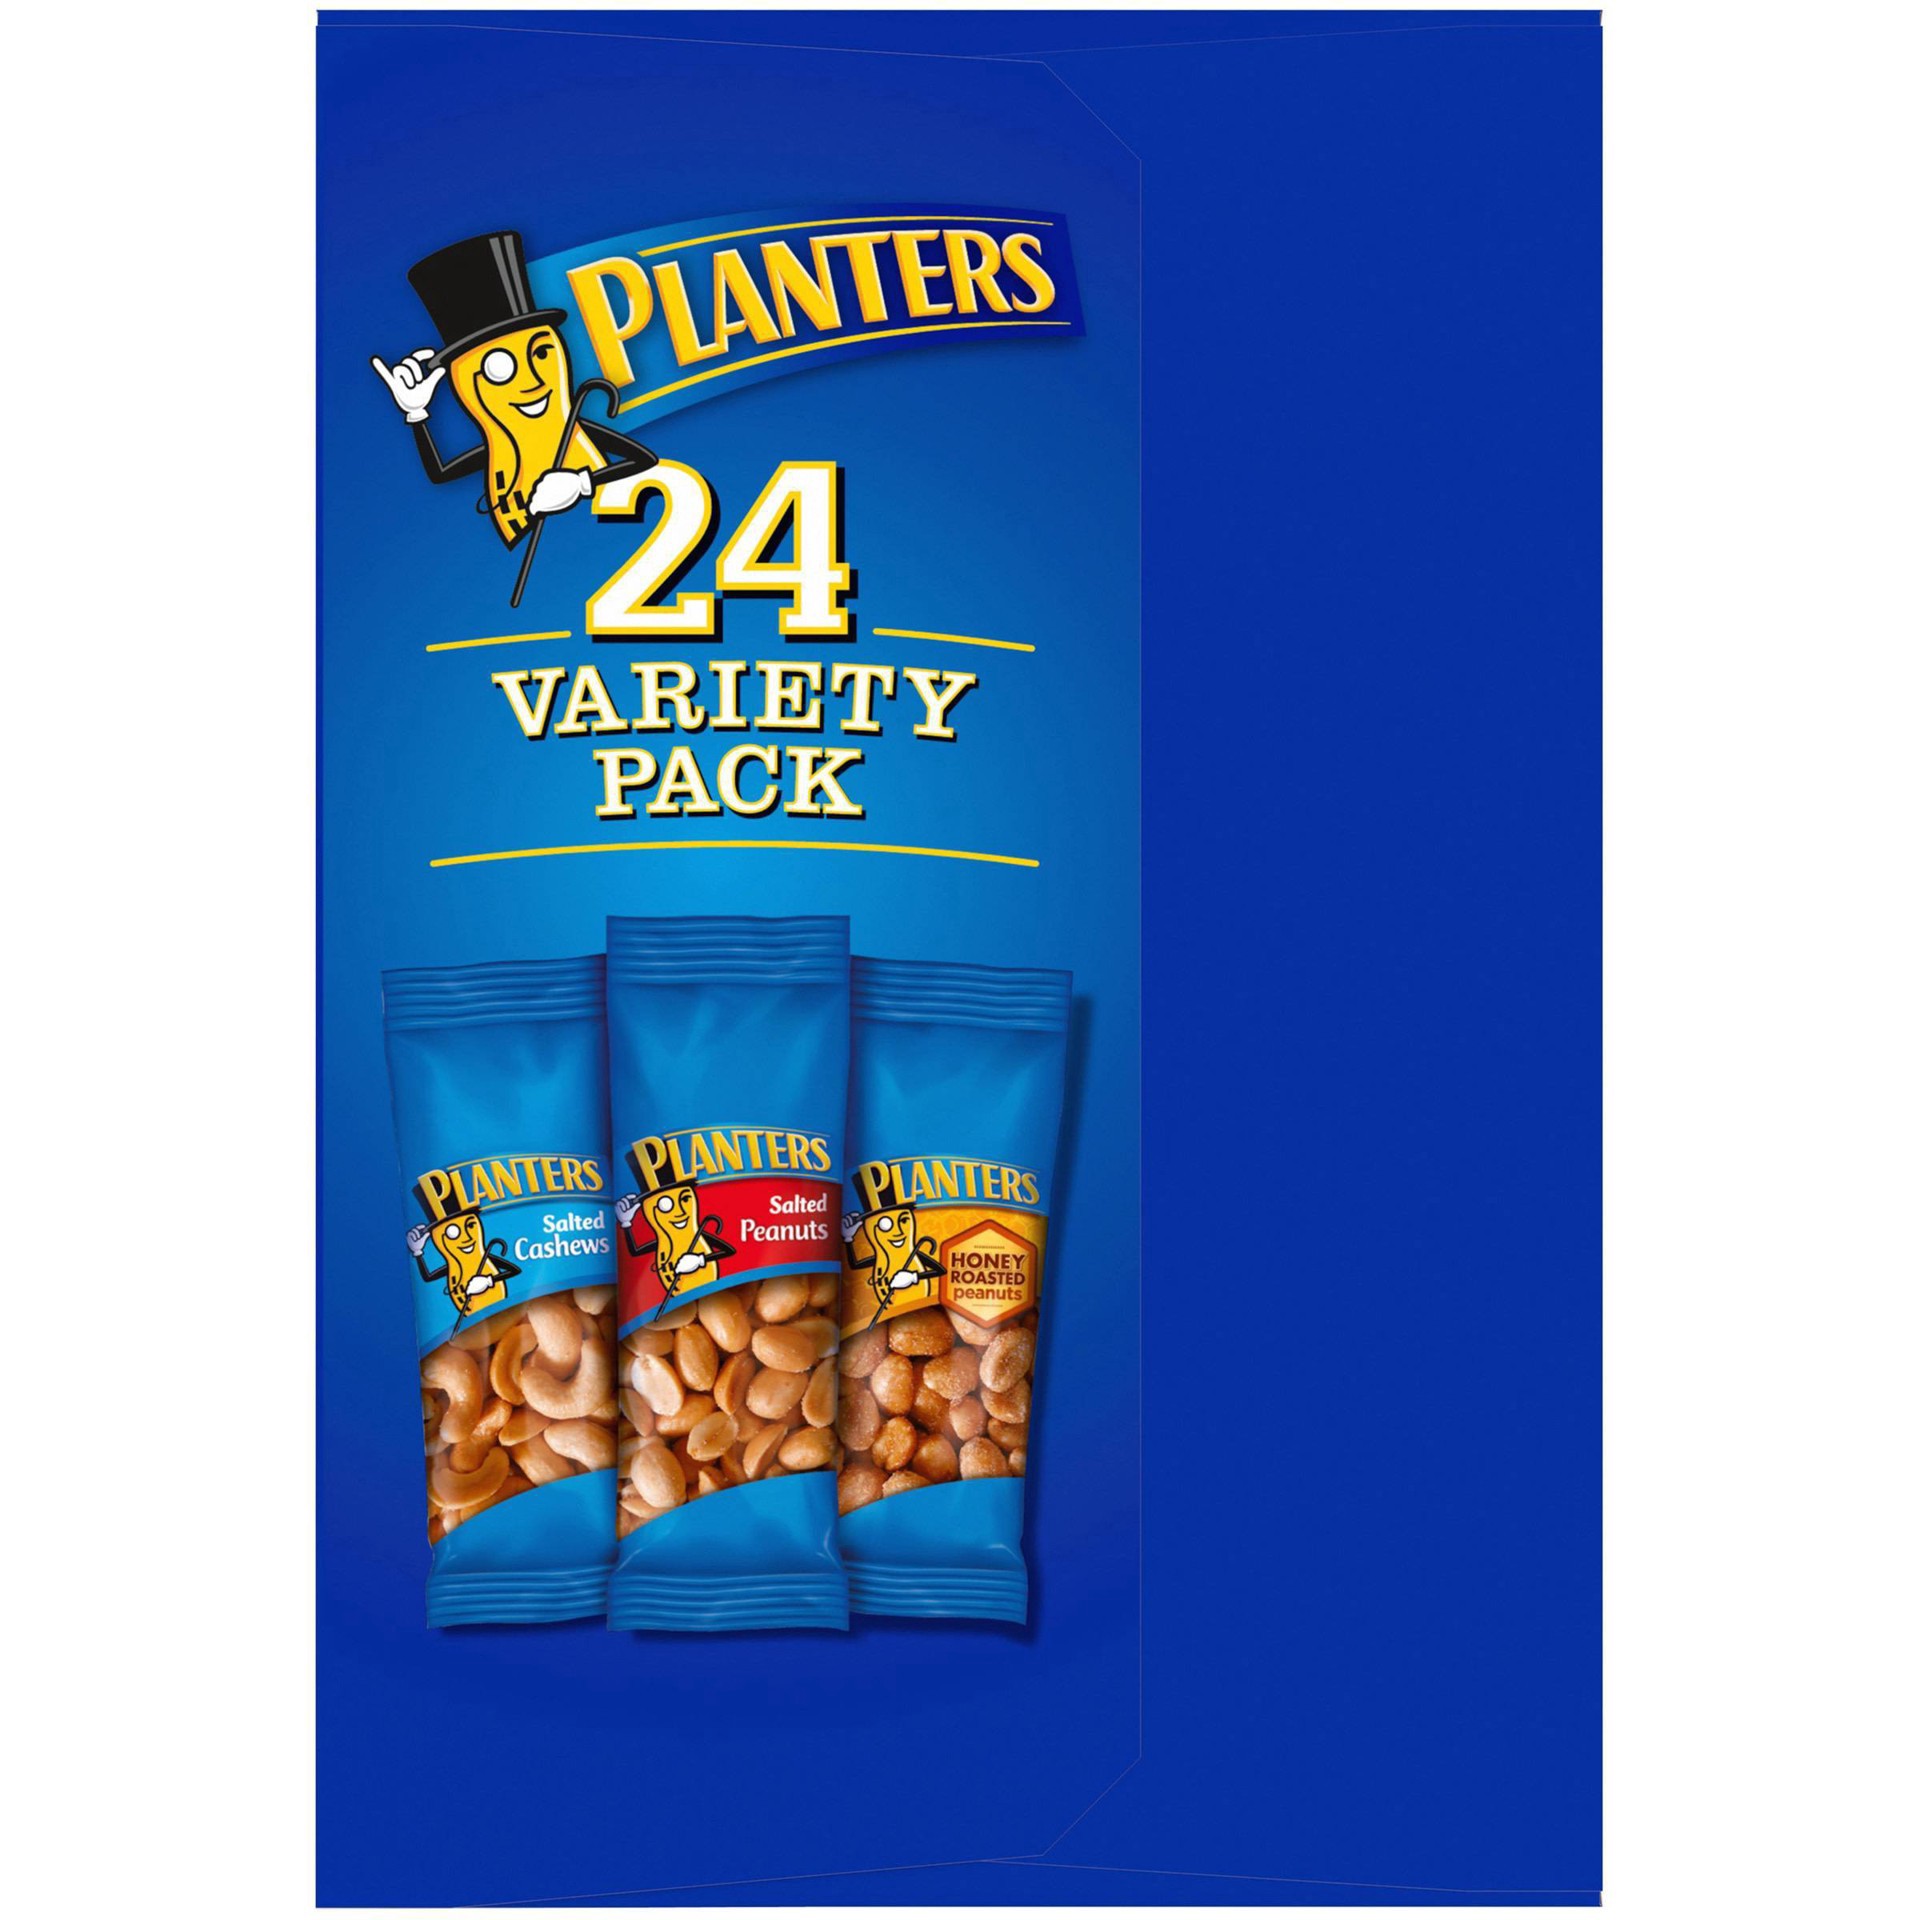 slide 14 of 27, Planters Nuts Cashews and Peanuts Variety Pack Snack Nuts, 24 ct - 40.5 oz Box, 40.5 oz